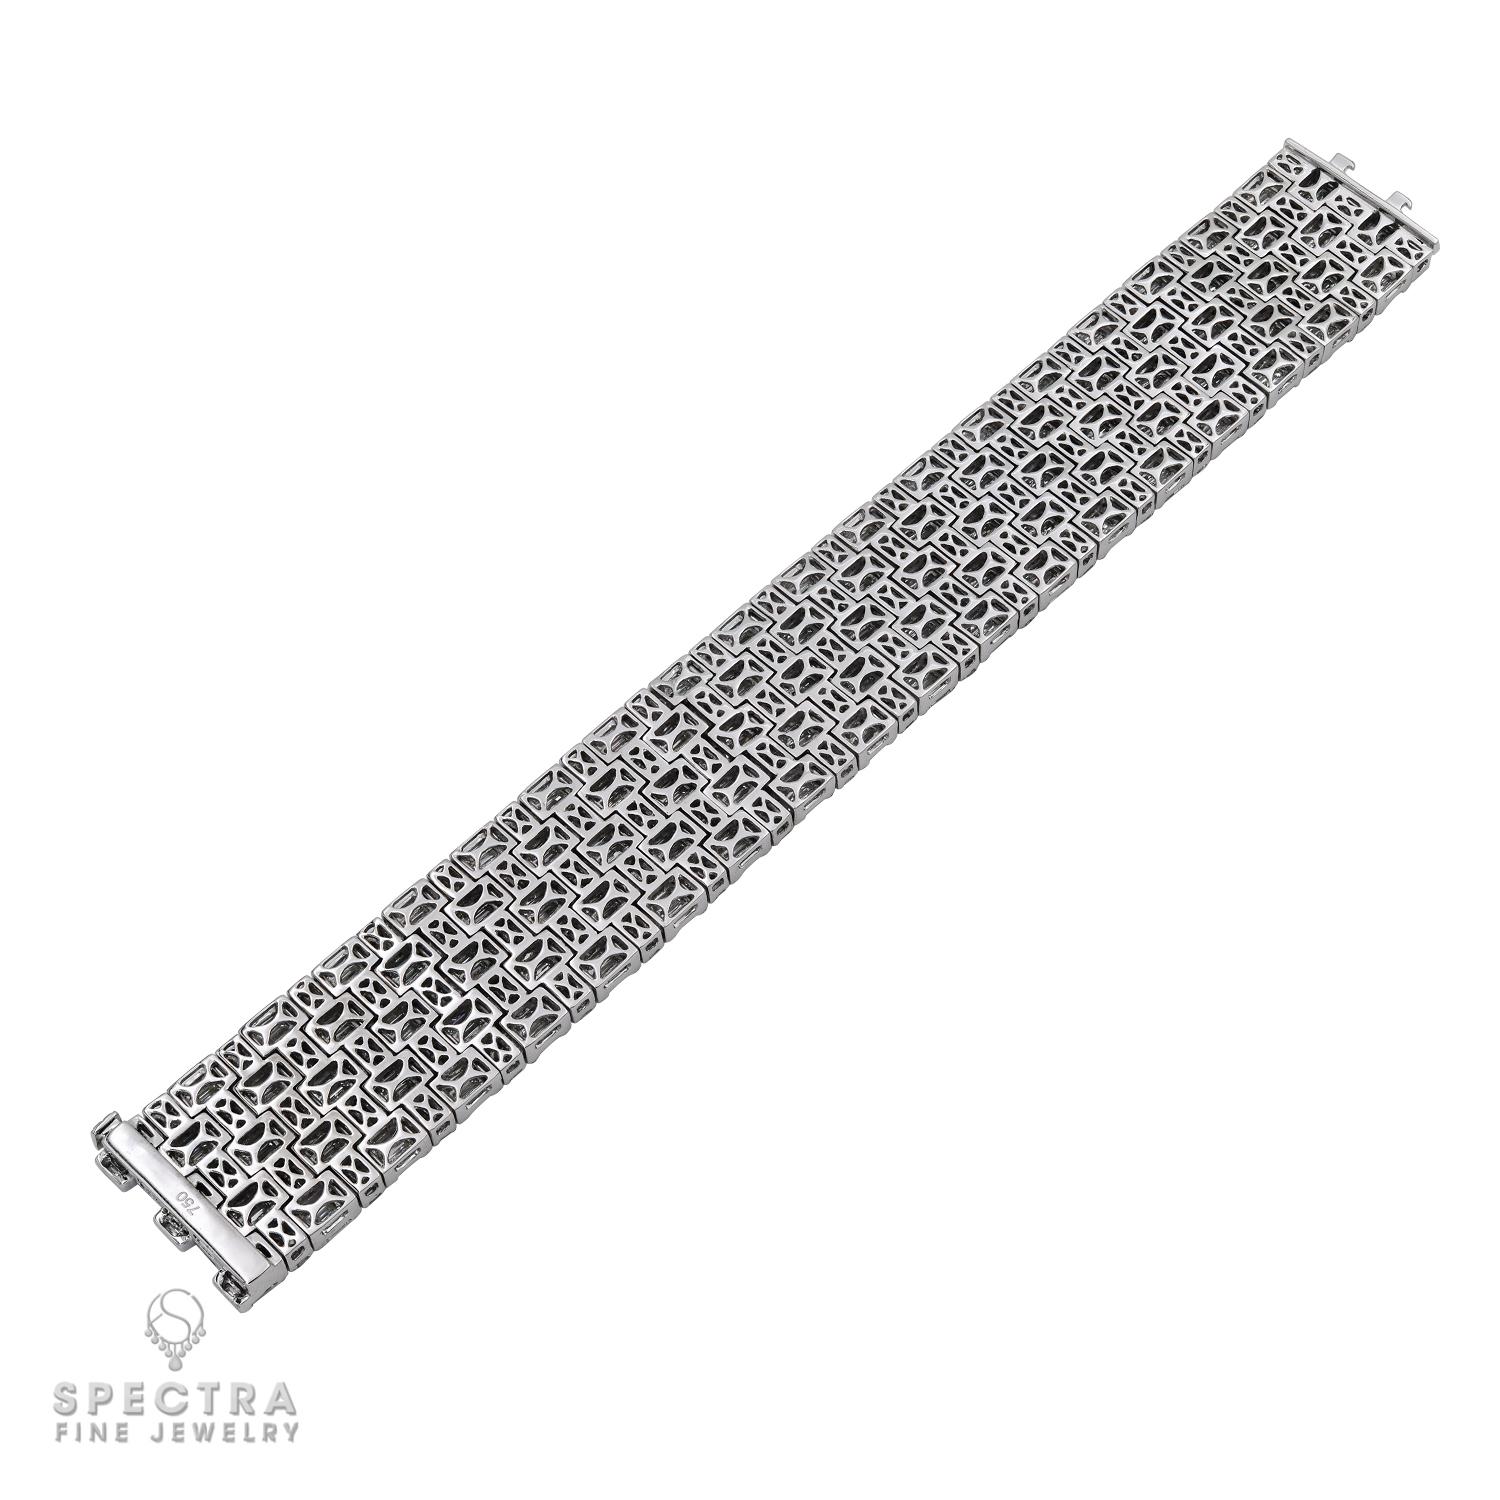 Spectra Fine Jewelry Contemporary 27.84 Carat Diamond Wide Bracelet In New Condition For Sale In New York, NY